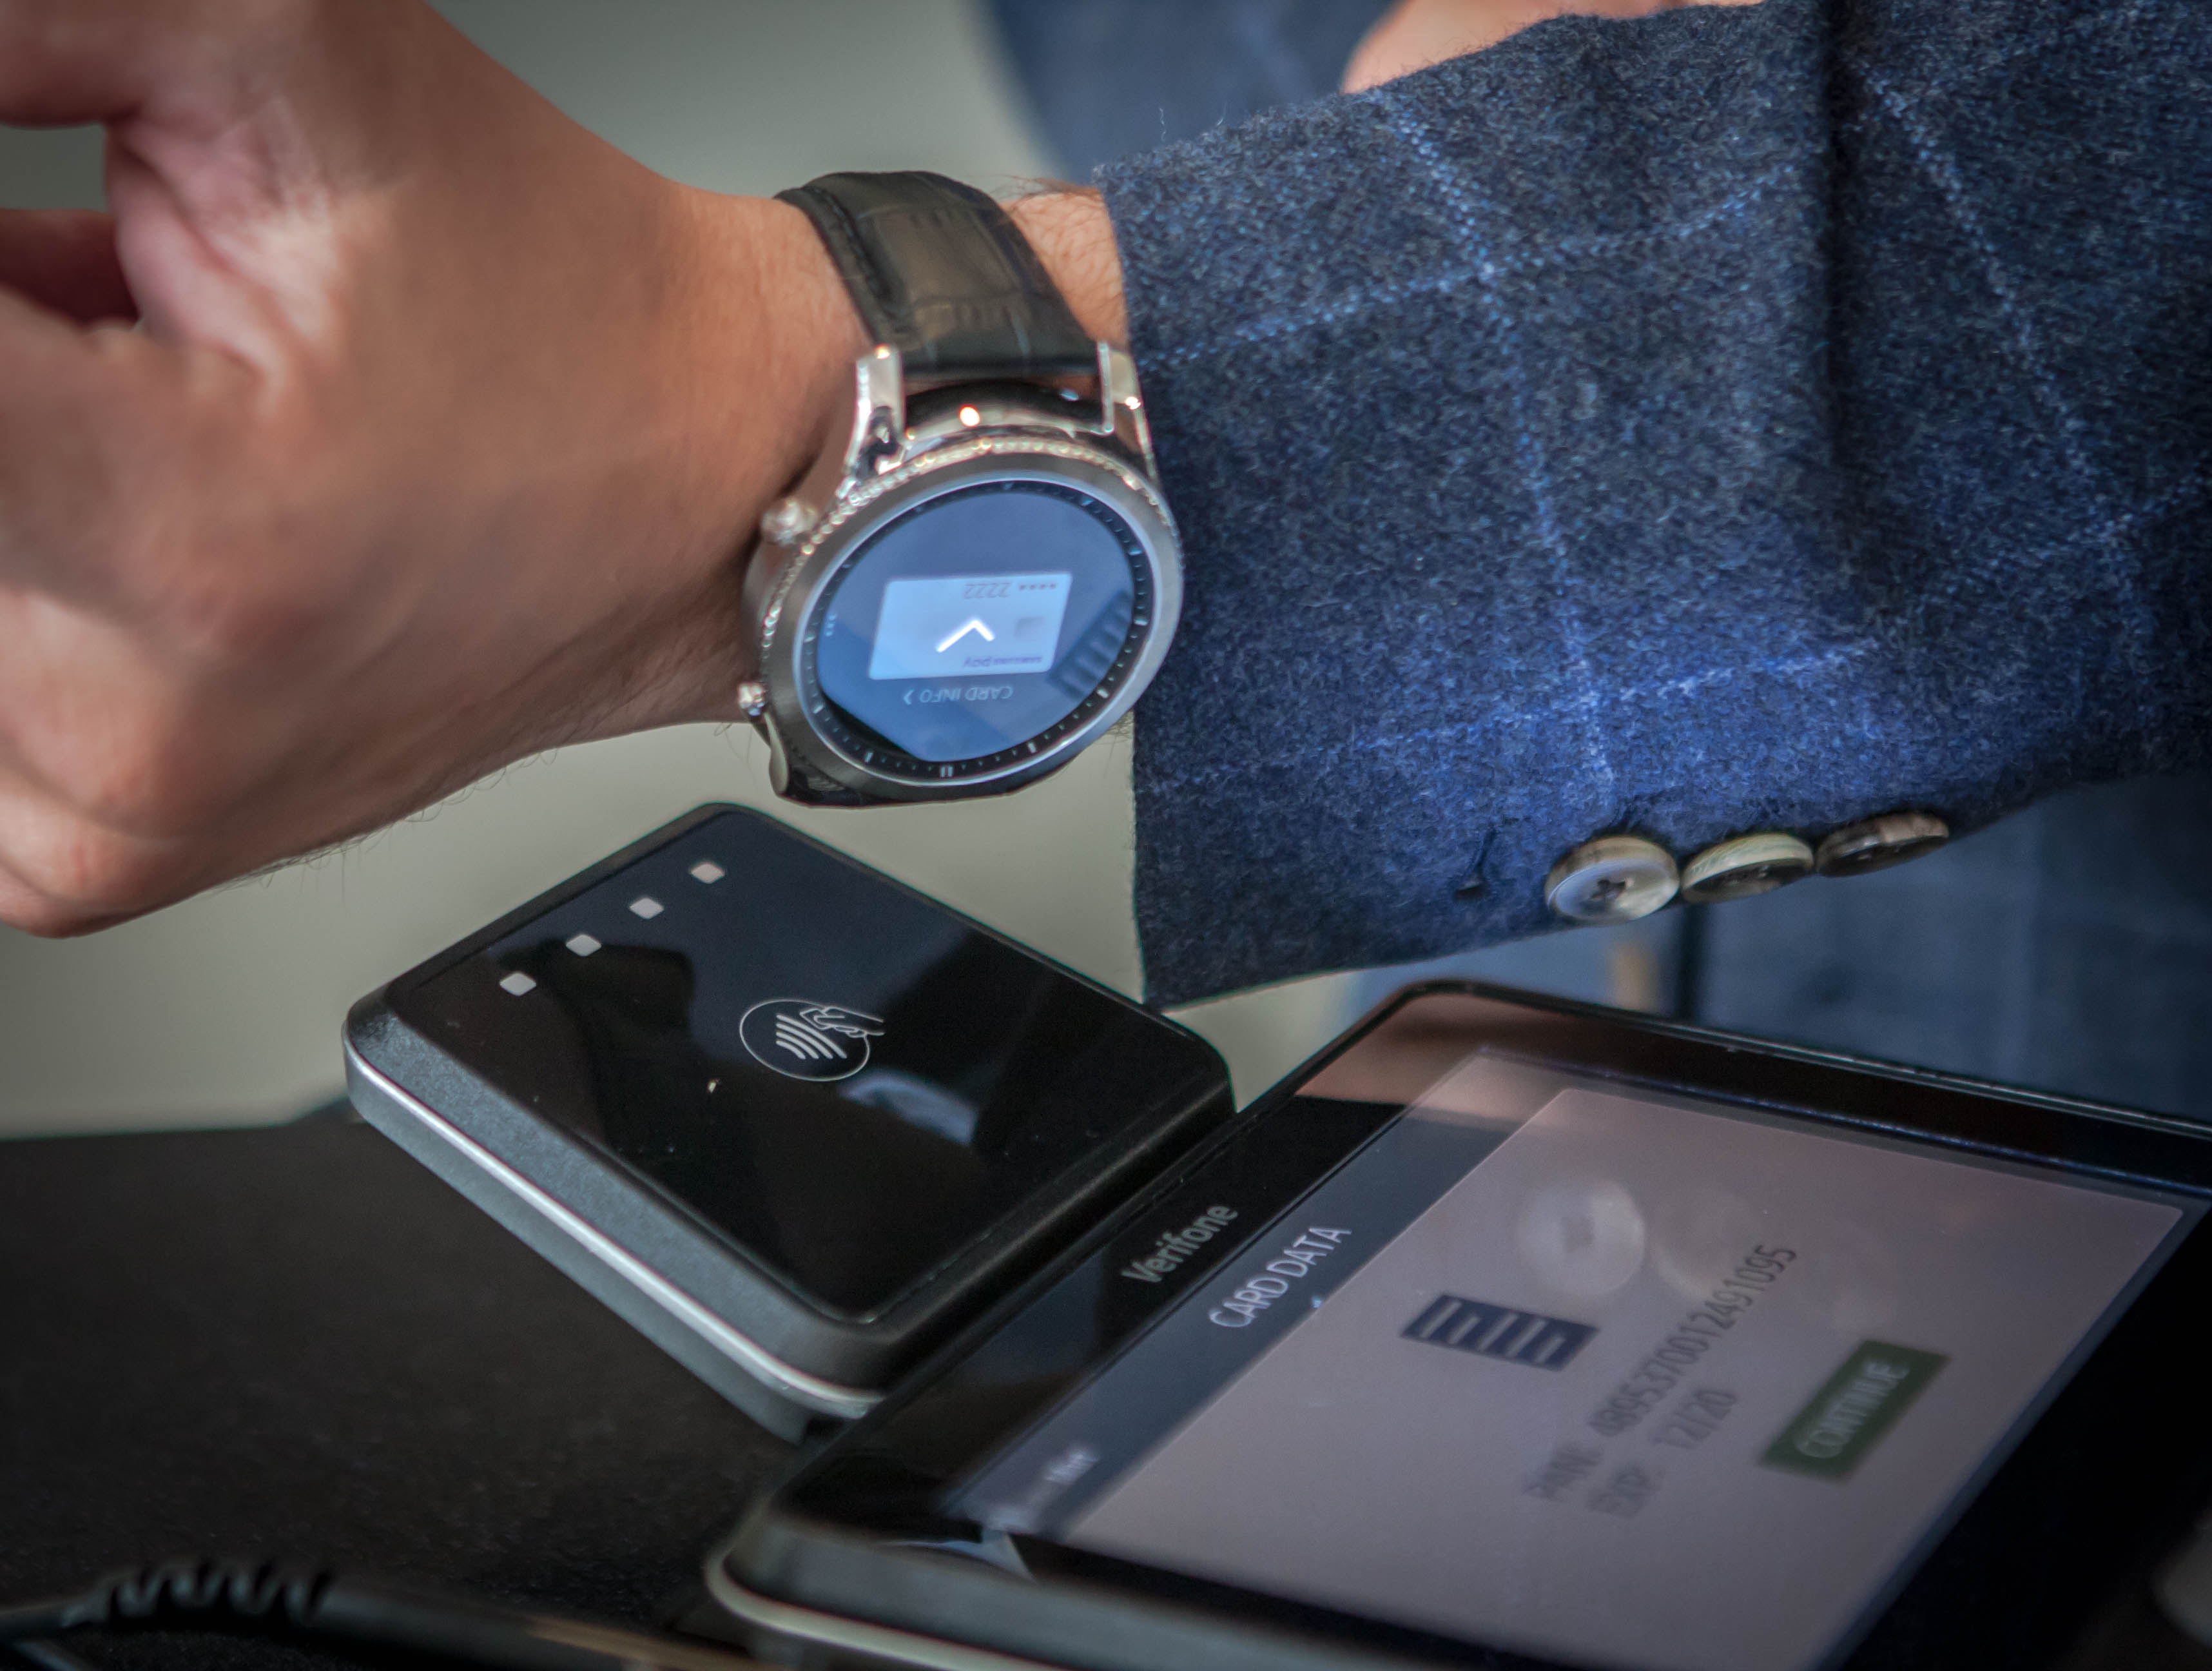 Using Samsung Pay with the Gear S3 smartwatch